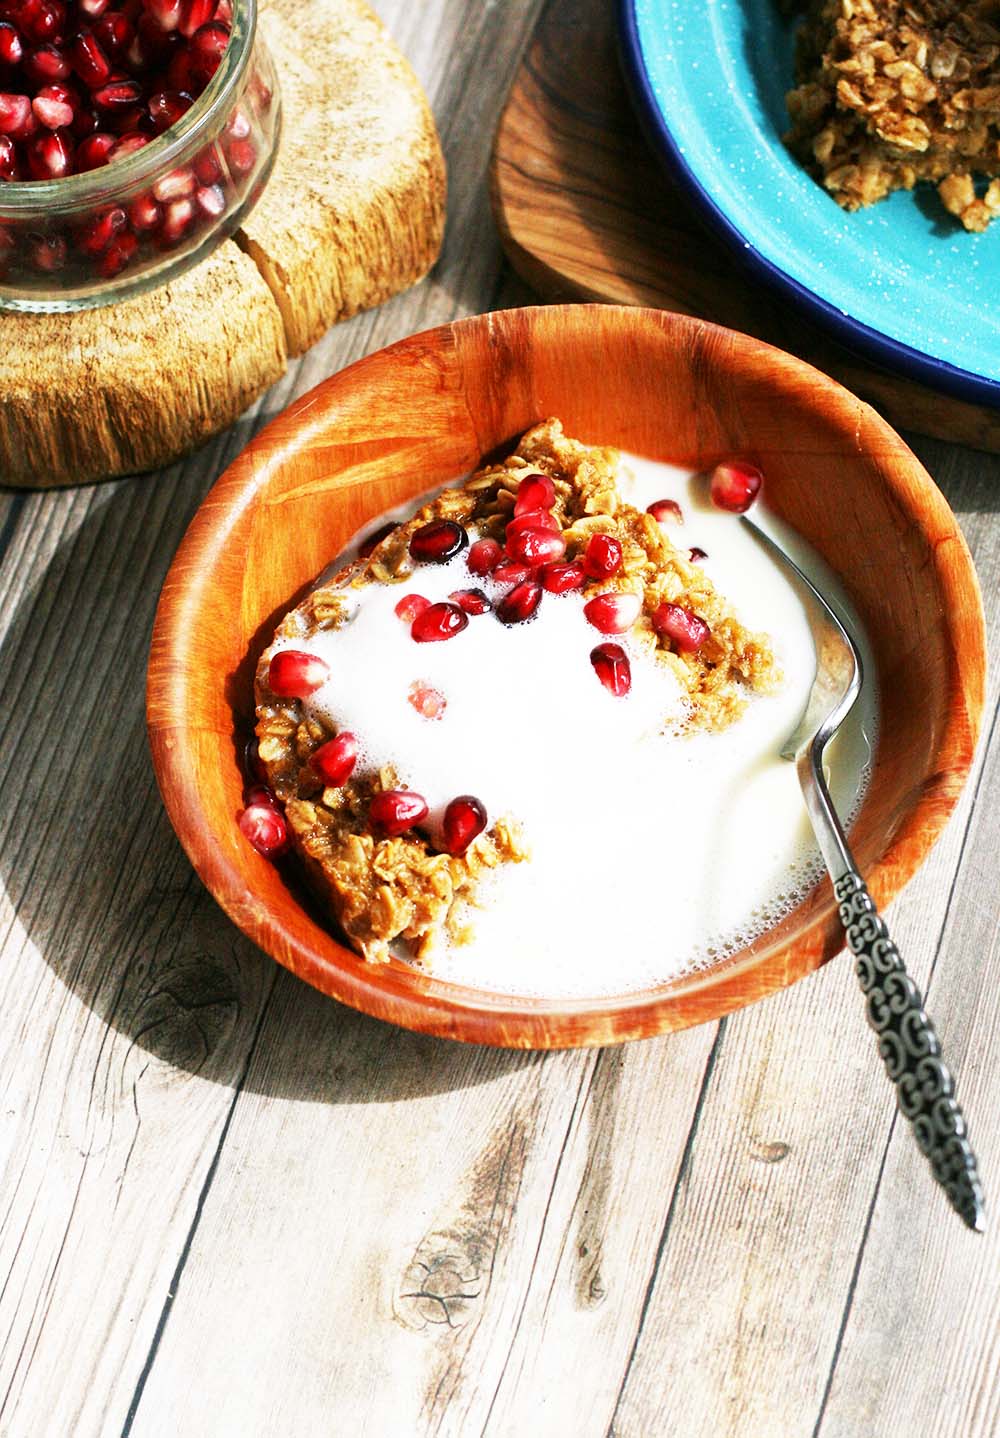 Simple baked oatmeal: Topped with steamed milk and pomegranate arils, or your choice of fresh fruit.